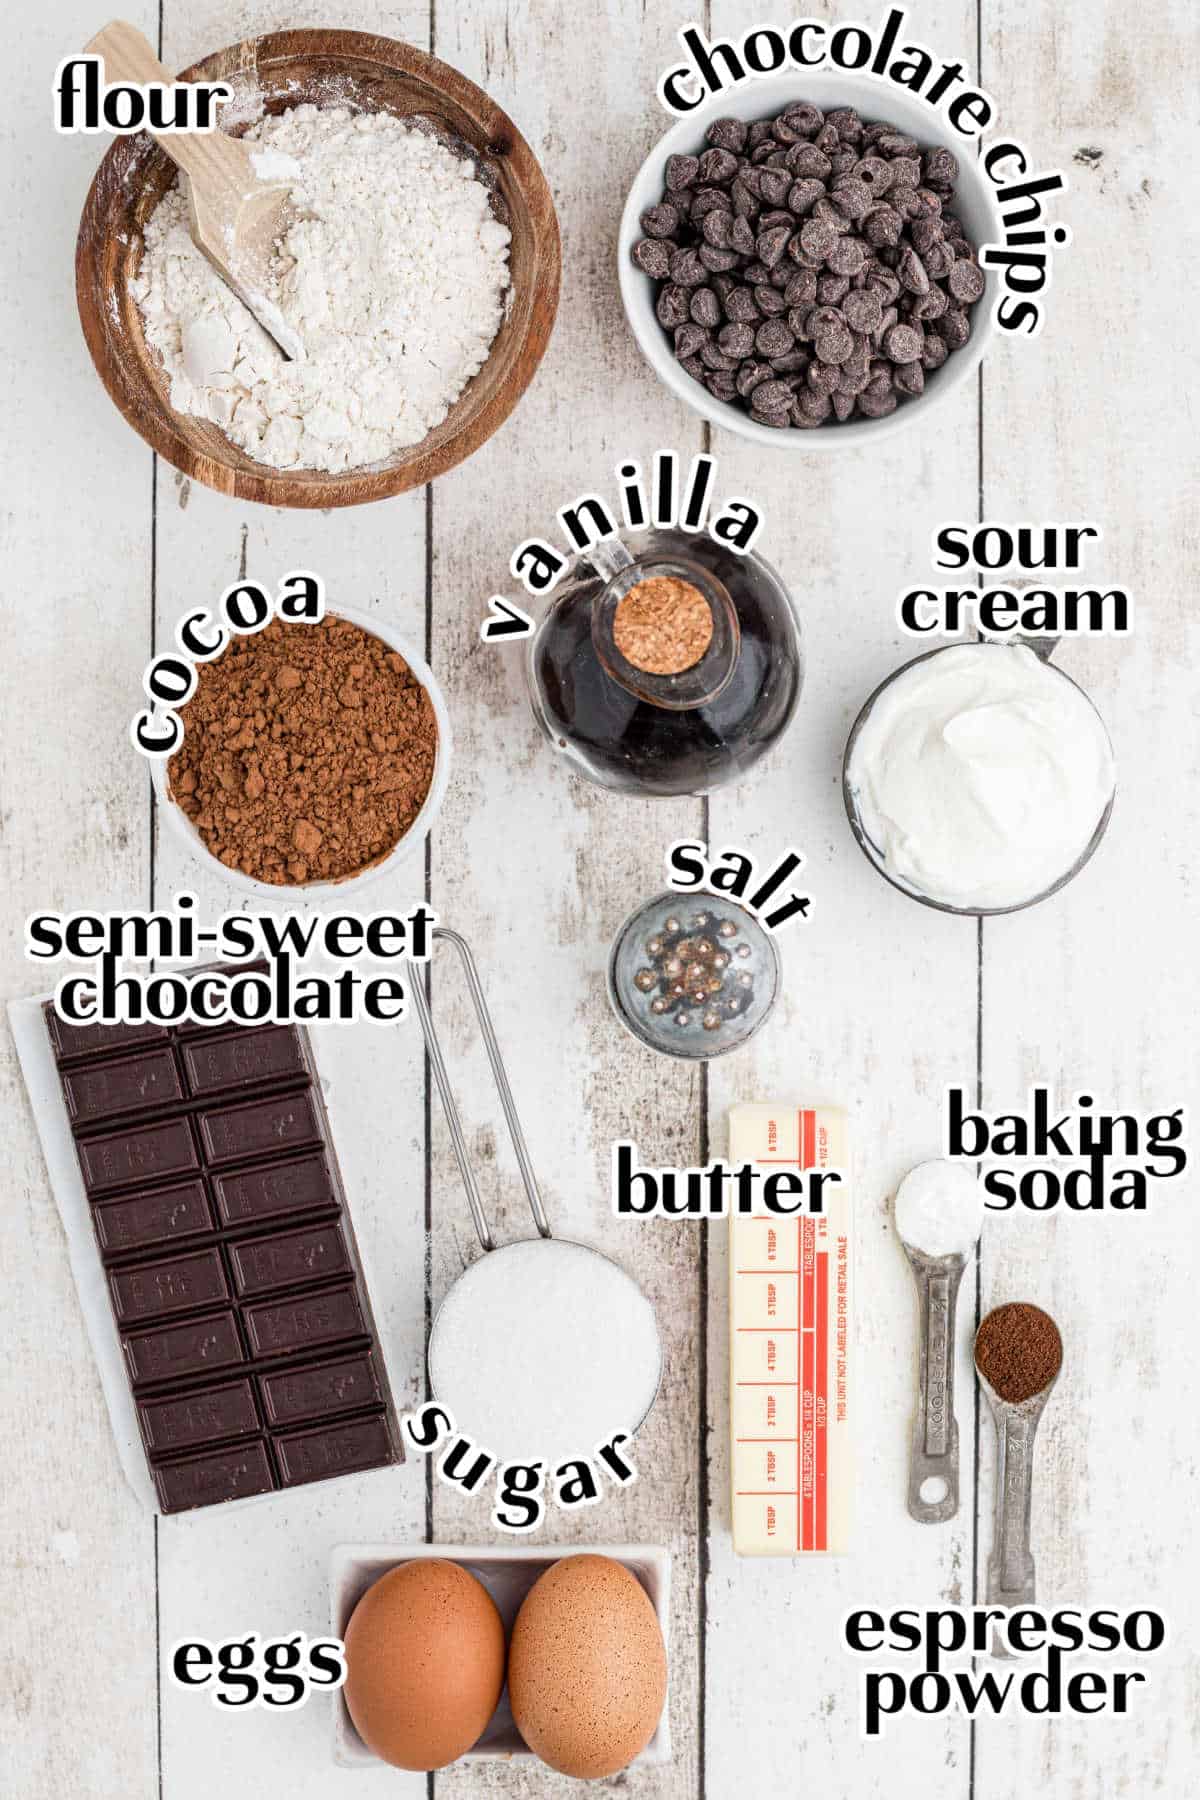 Labeled ingredients for chocolate muffins on a table.